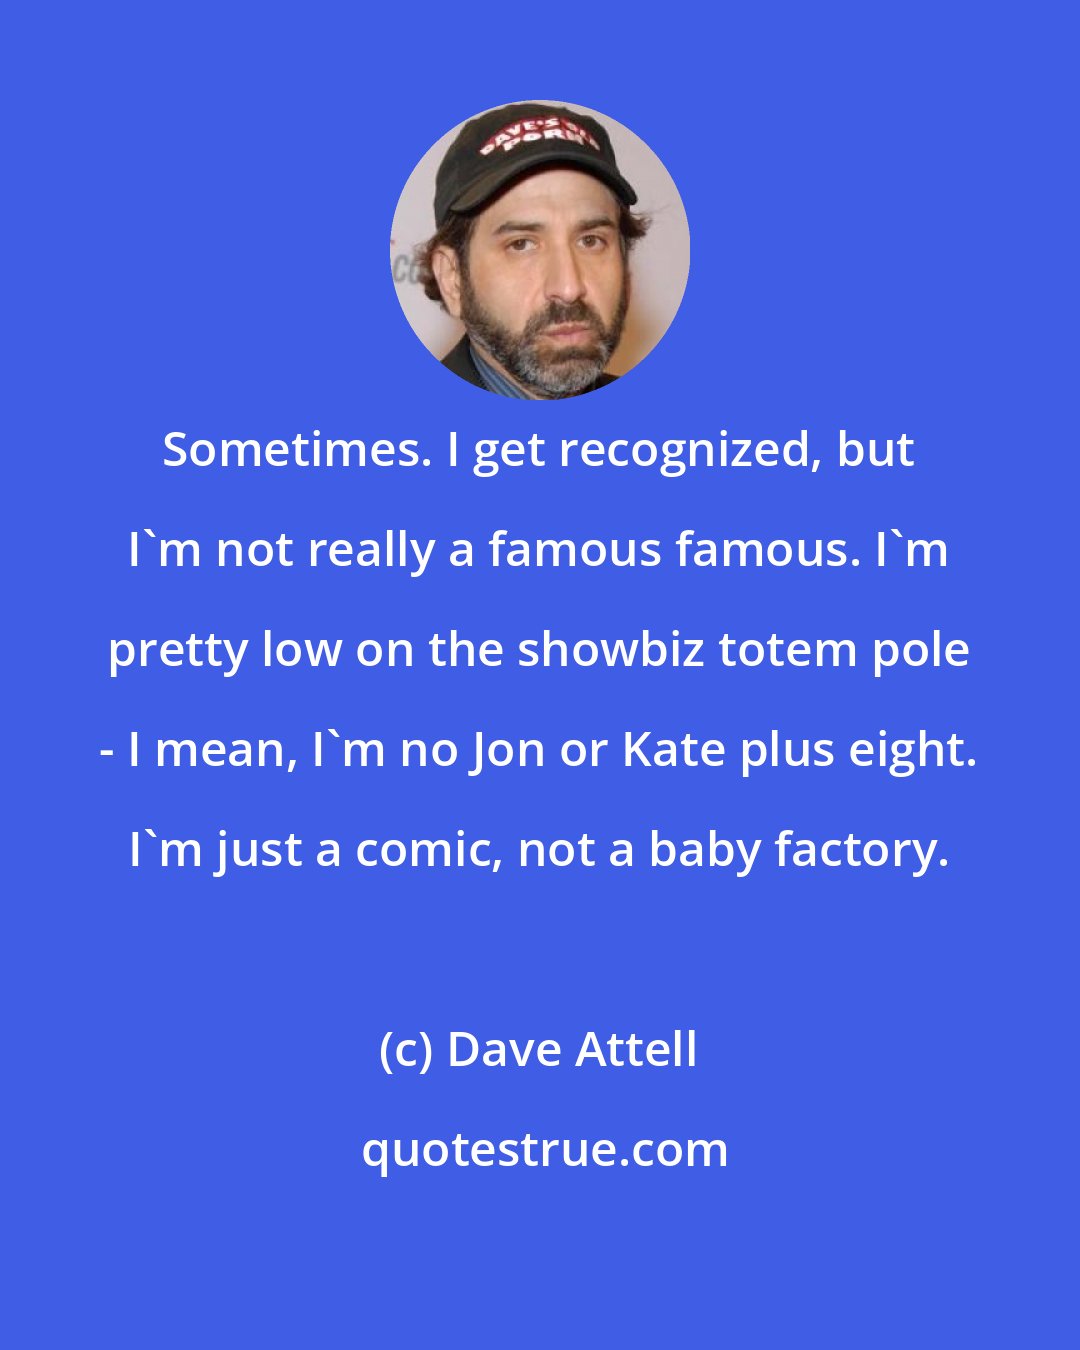 Dave Attell: Sometimes. I get recognized, but I'm not really a famous famous. I'm pretty low on the showbiz totem pole - I mean, I'm no Jon or Kate plus eight. I'm just a comic, not a baby factory.